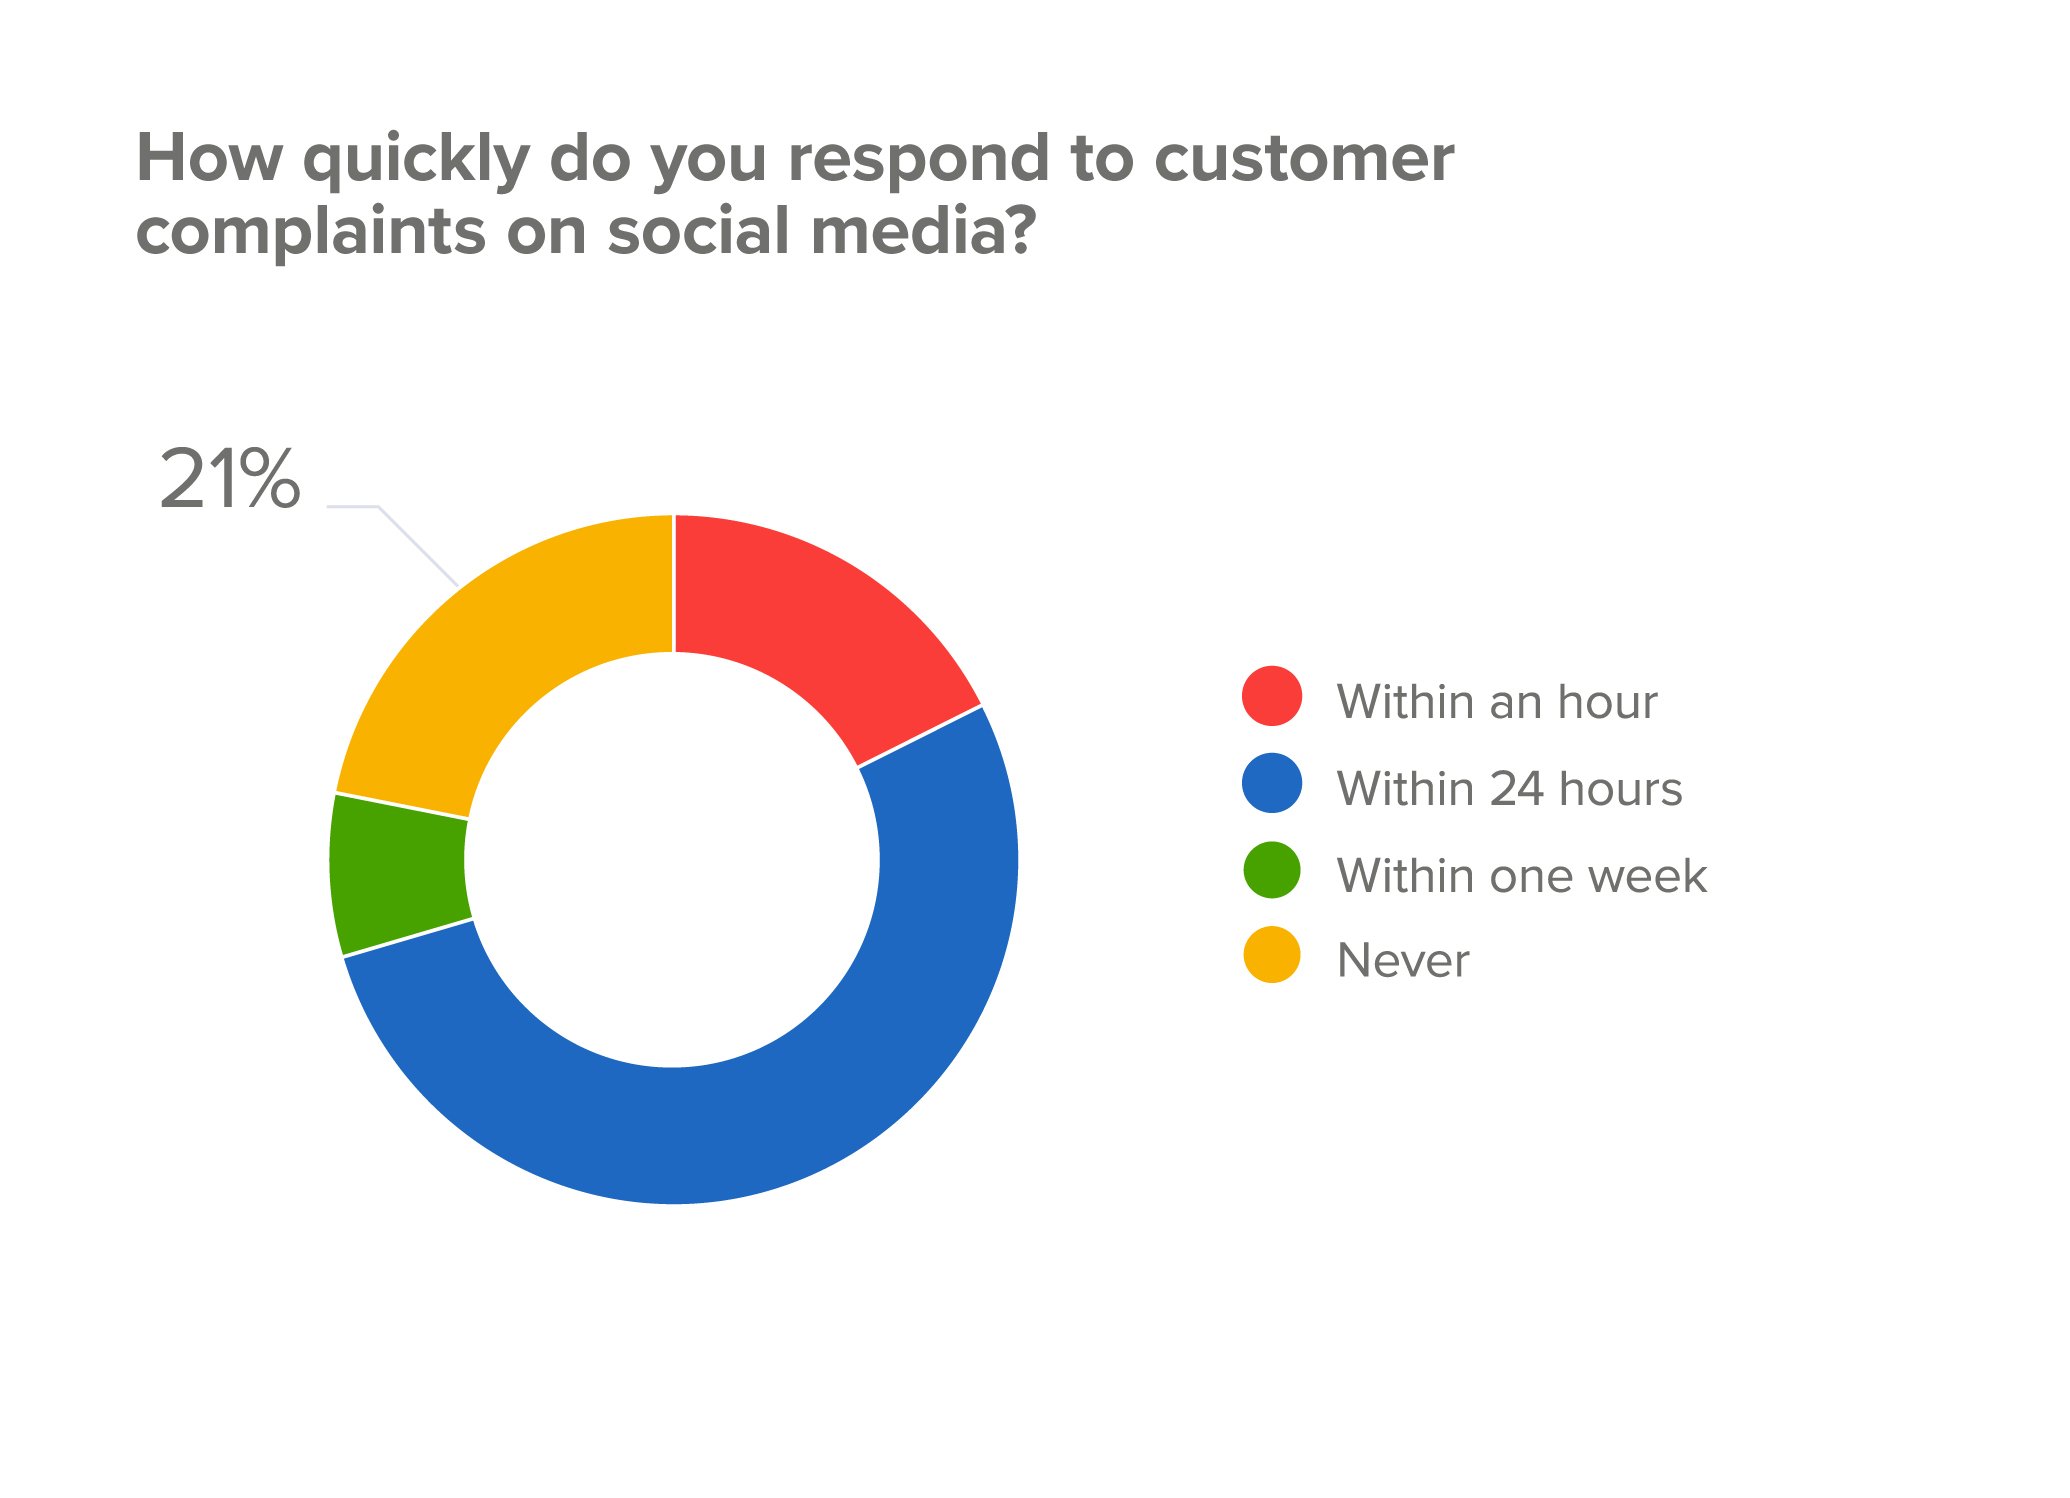 How quickly do you respond to customer complaints on social media?